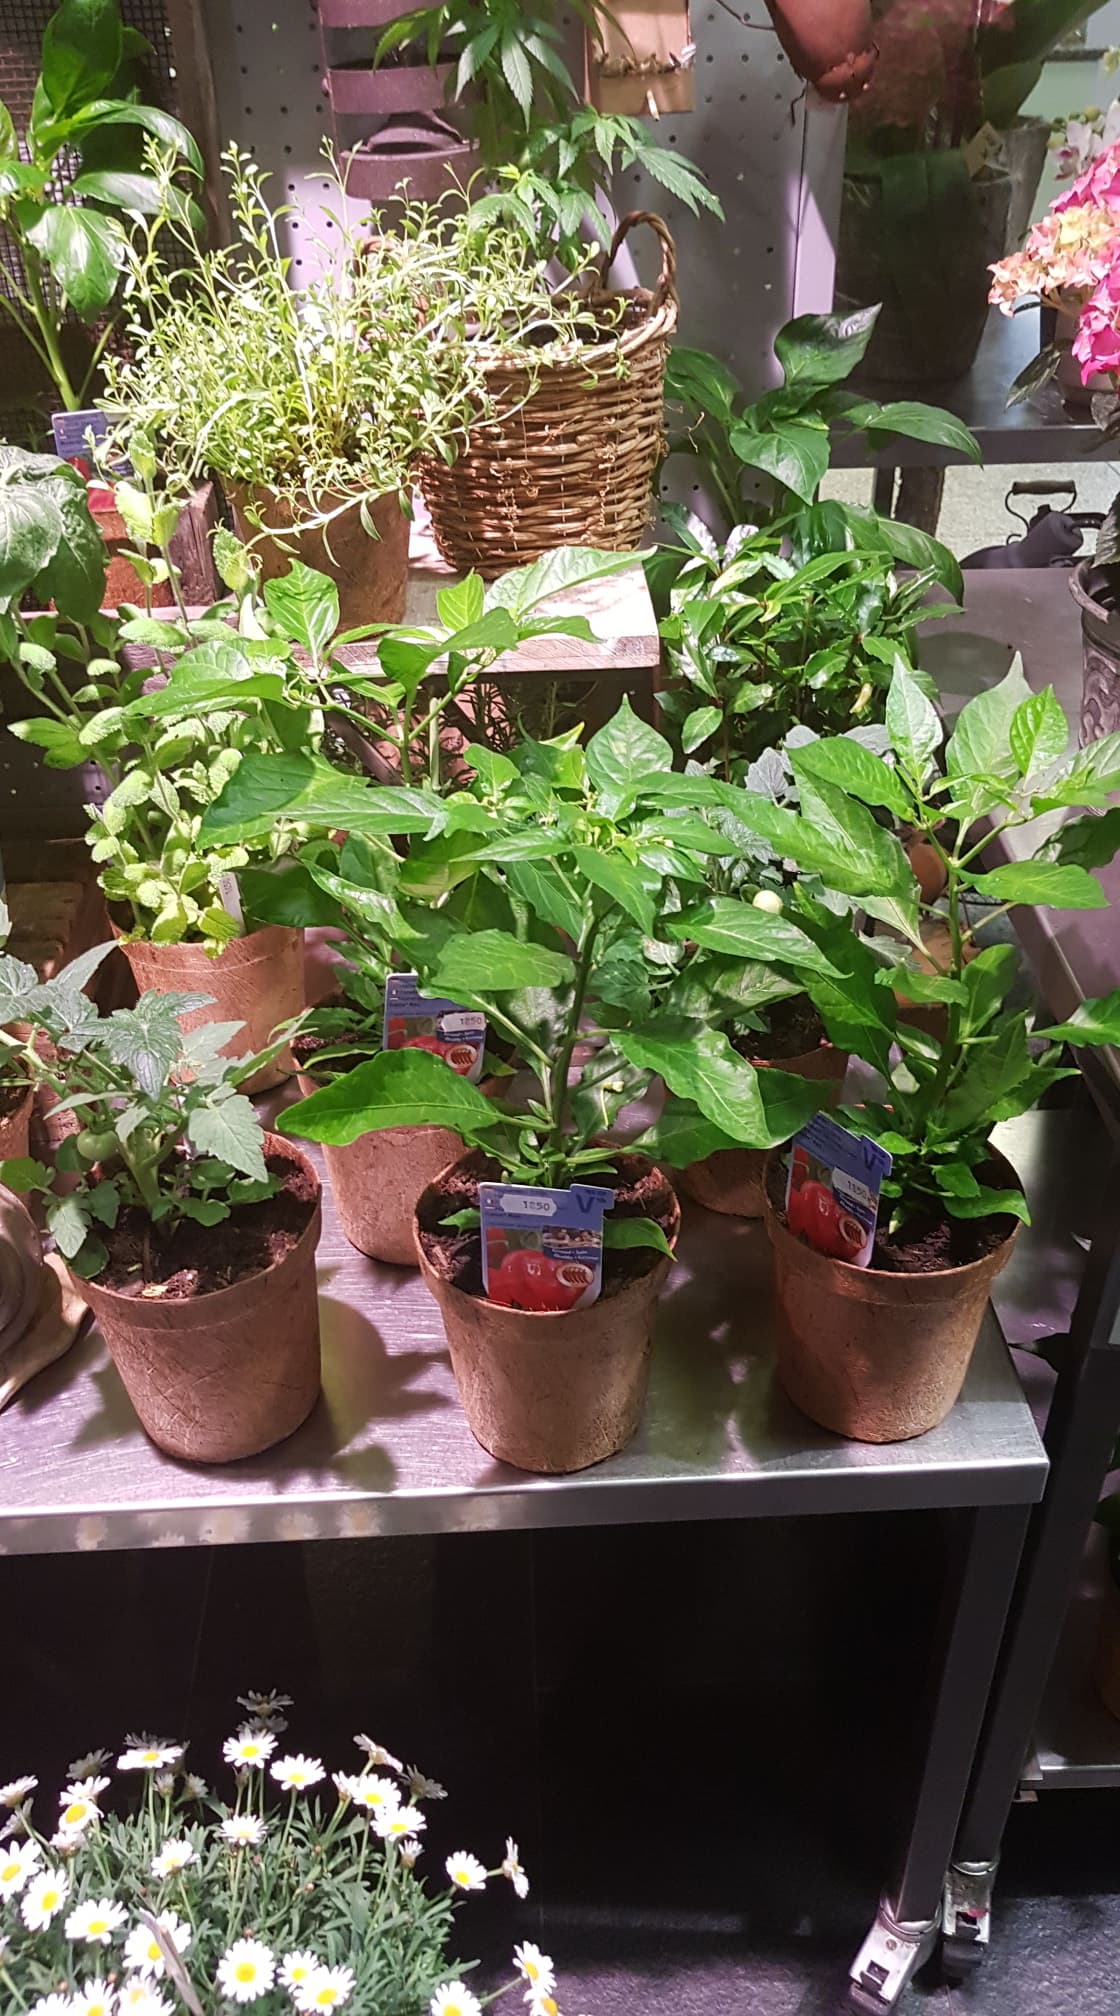 Biodegradable Pots for tomatoes and herbs